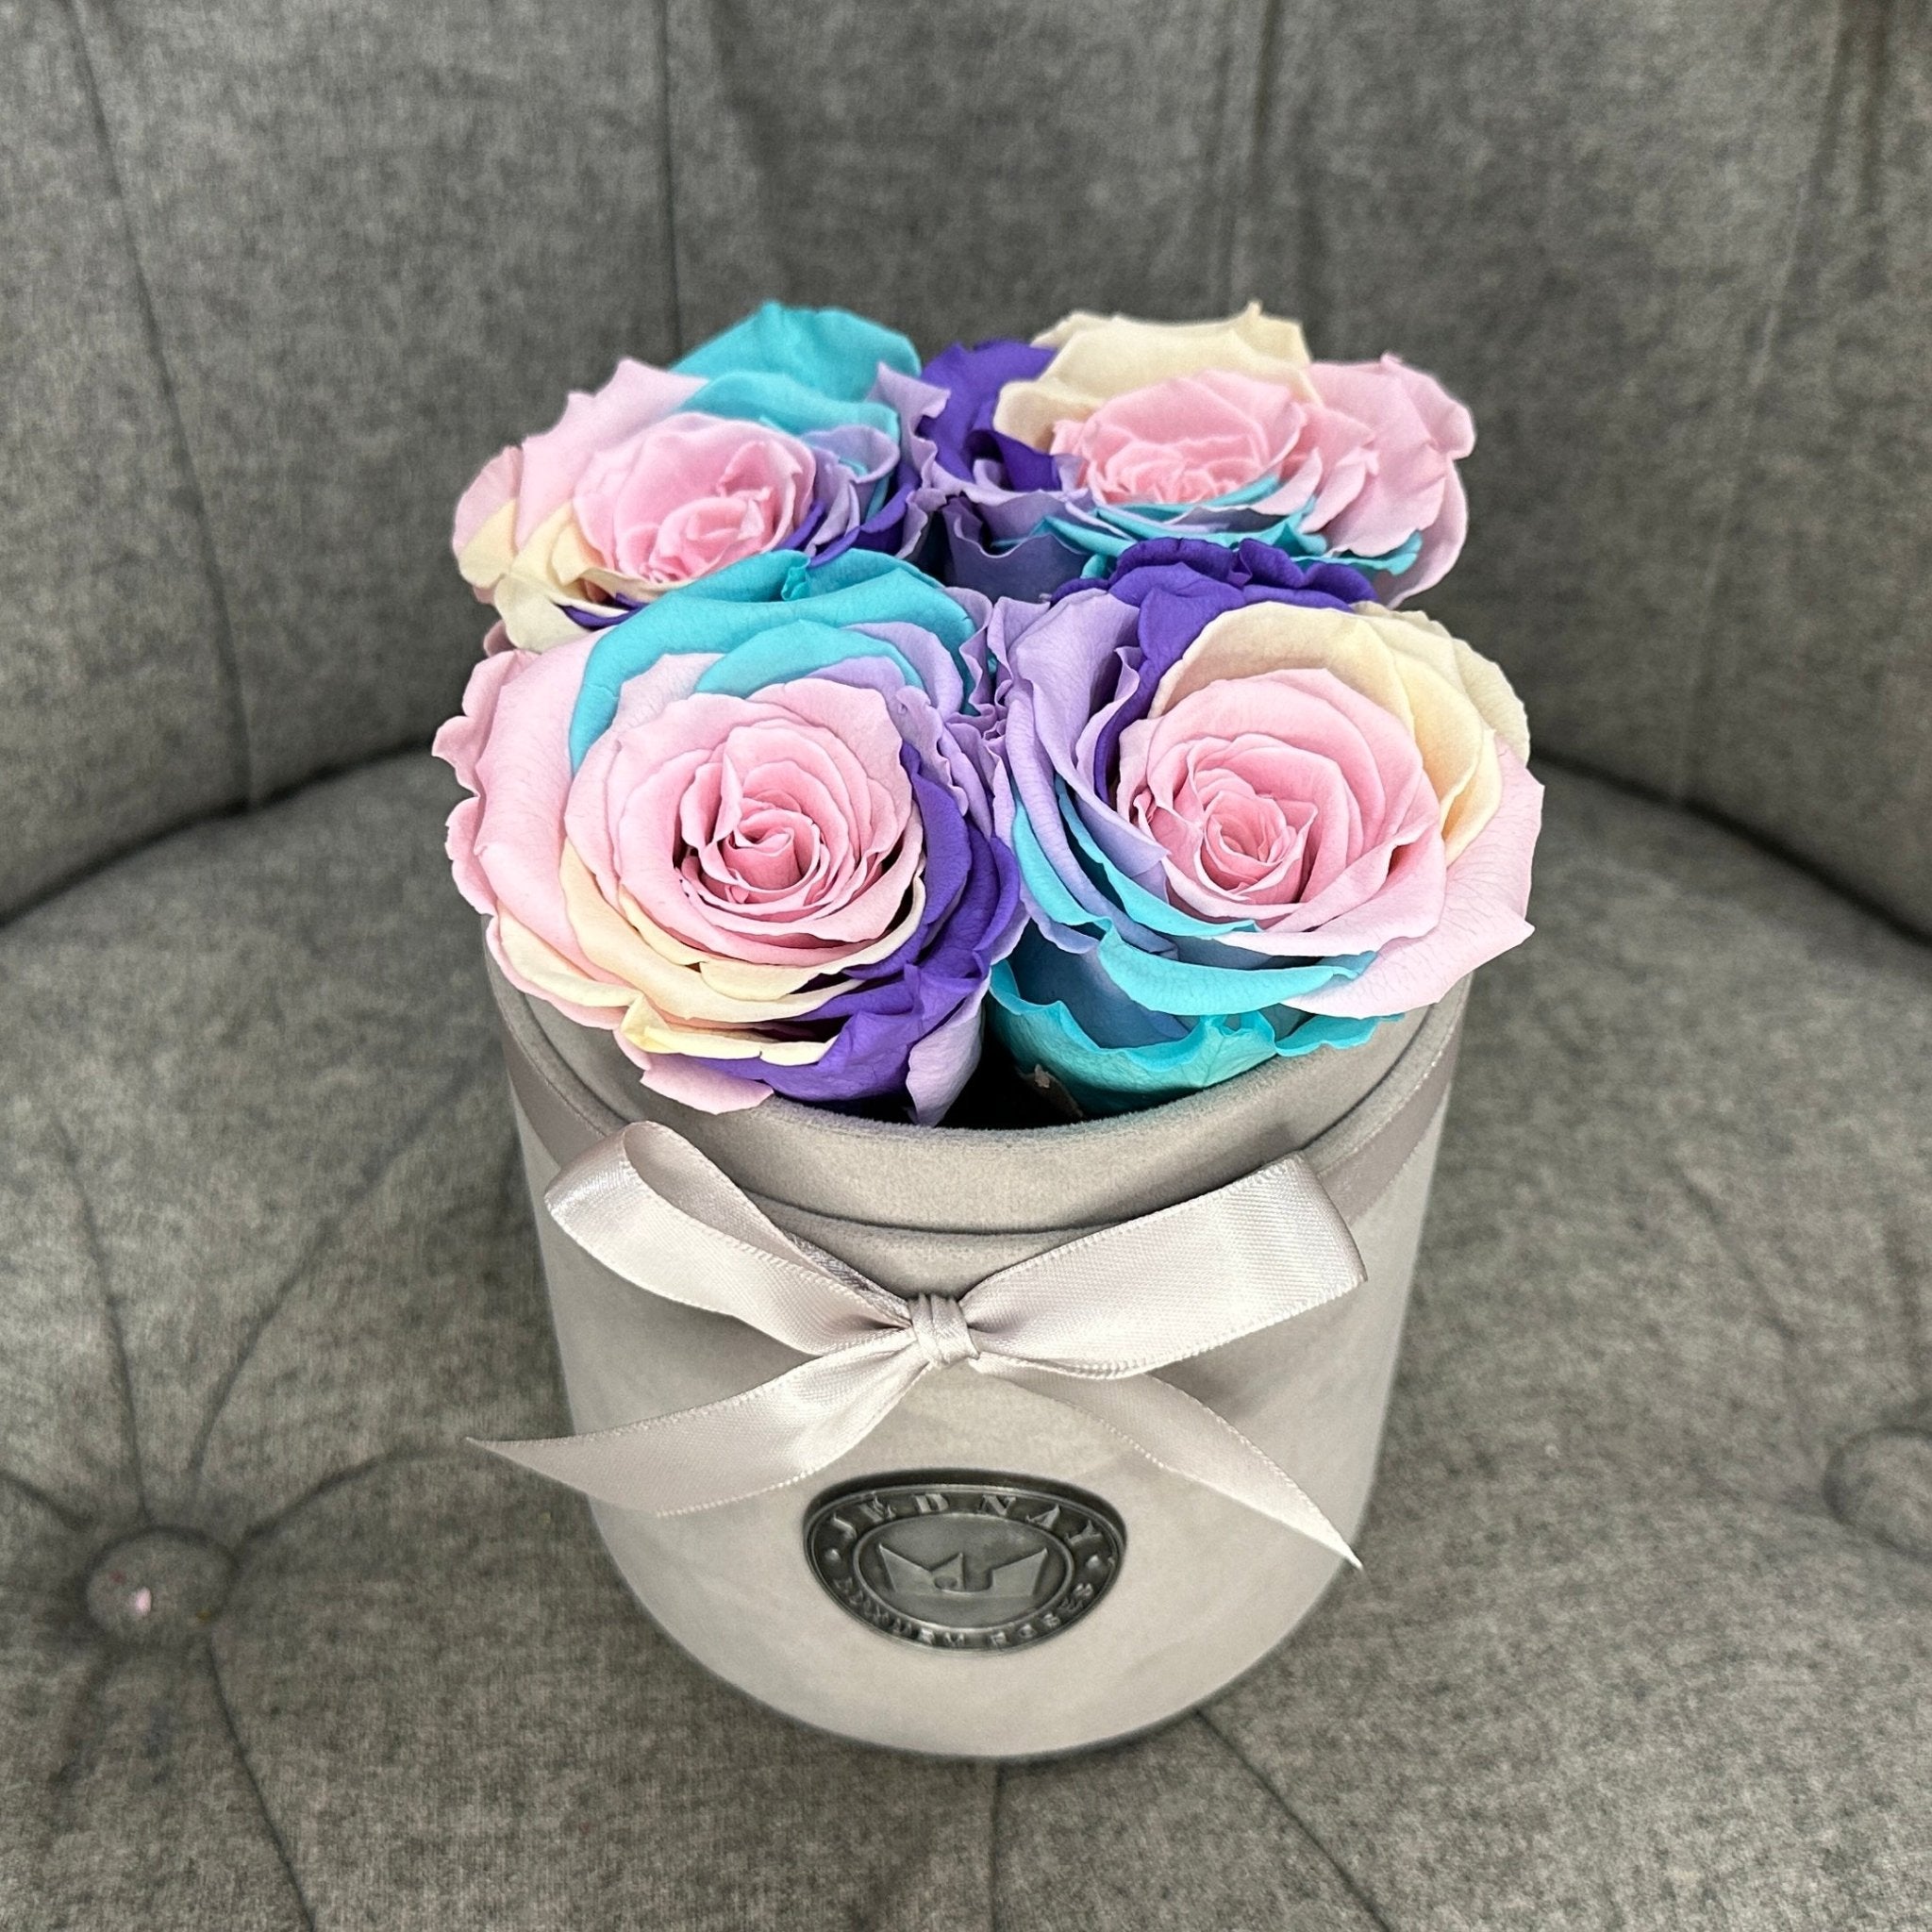 Petite Grey Suede Forever Rose Box - Over The Rainbow Eternal Roses - Jednay Roses